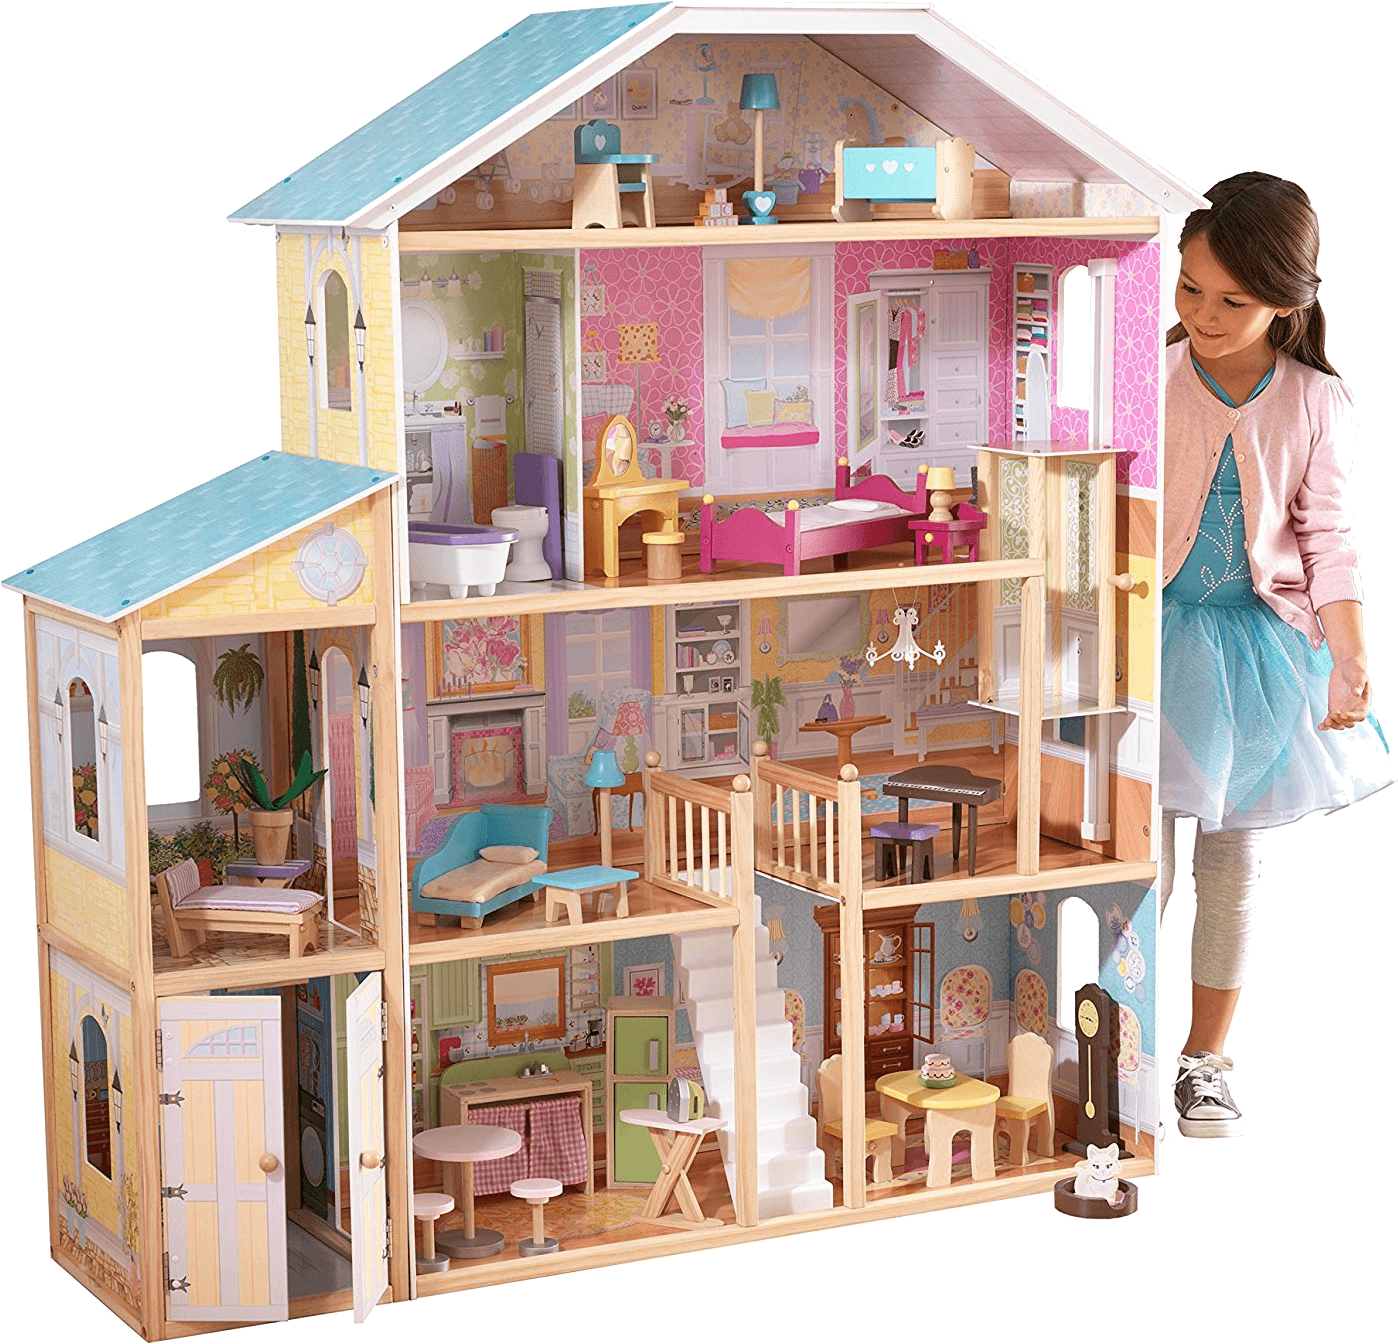 A Girl Standing Next To A Doll House